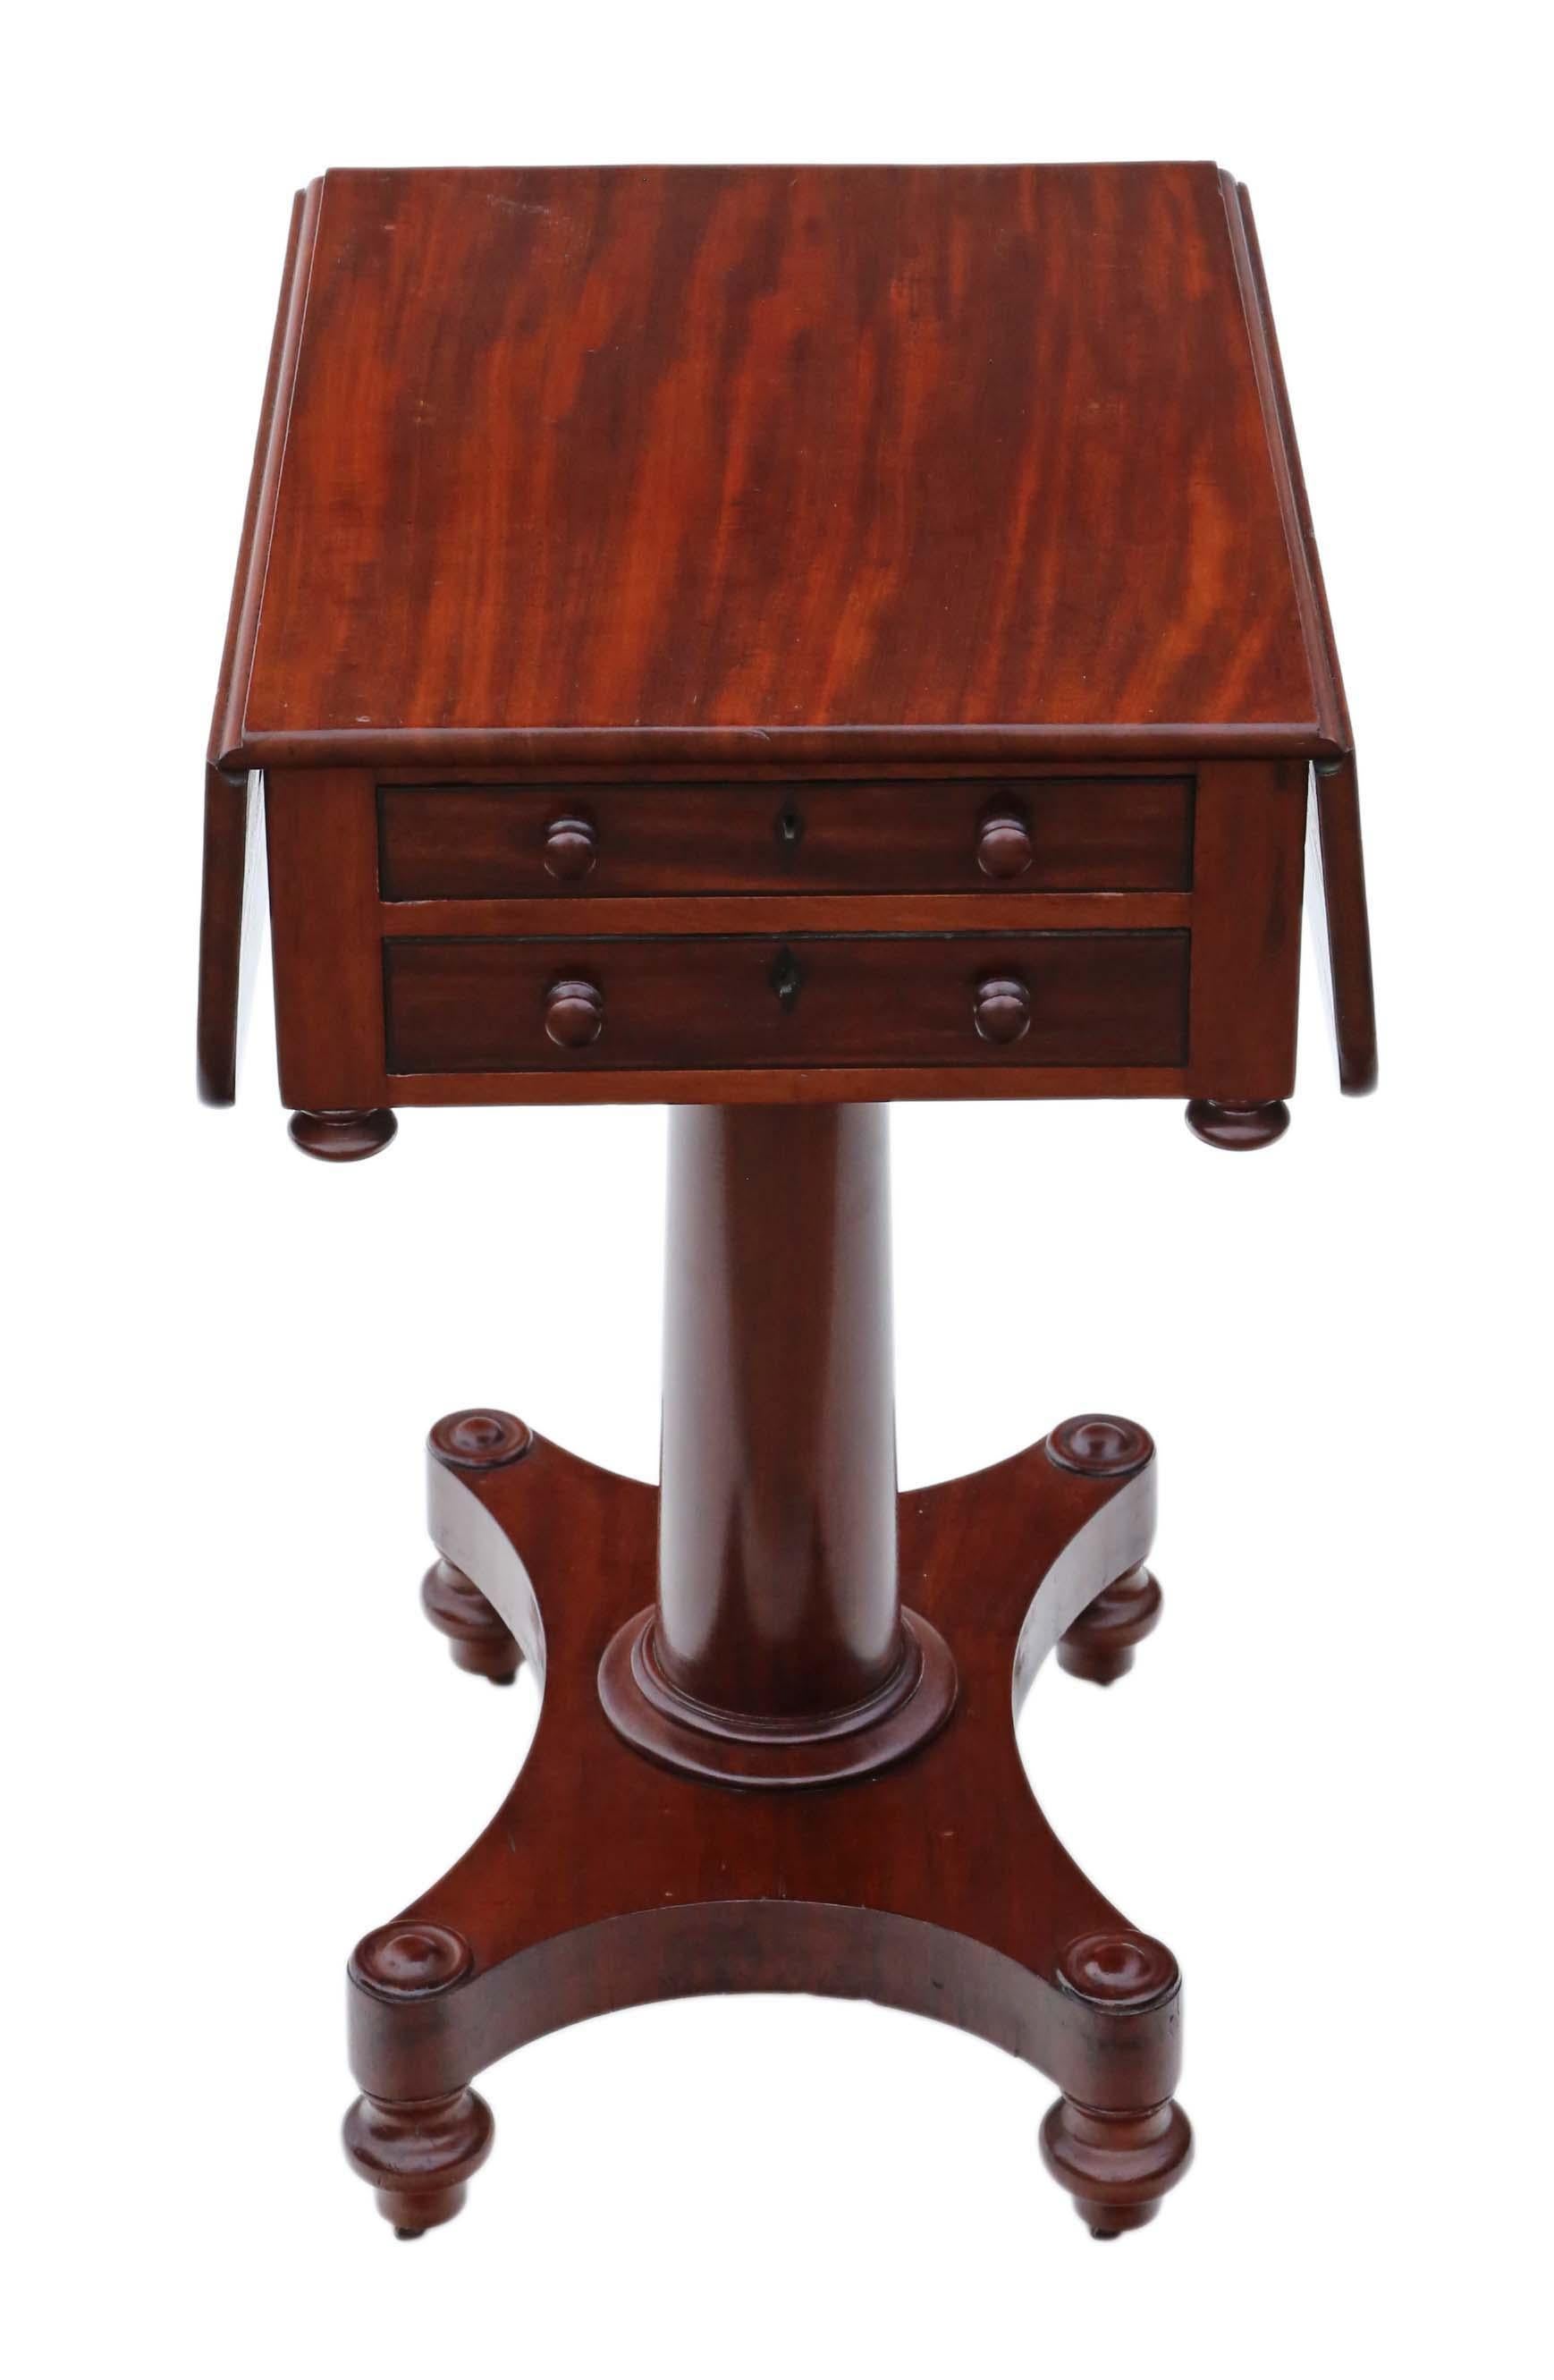 19th century mahogany two drawer drop leaf work table, circa 1820-1840 (Regency/William IV). Two mahogany lined drawers to one side, which slide freely (dummies to the other).
Solid and strong, with no loose joints and no woodworm. Full of age,